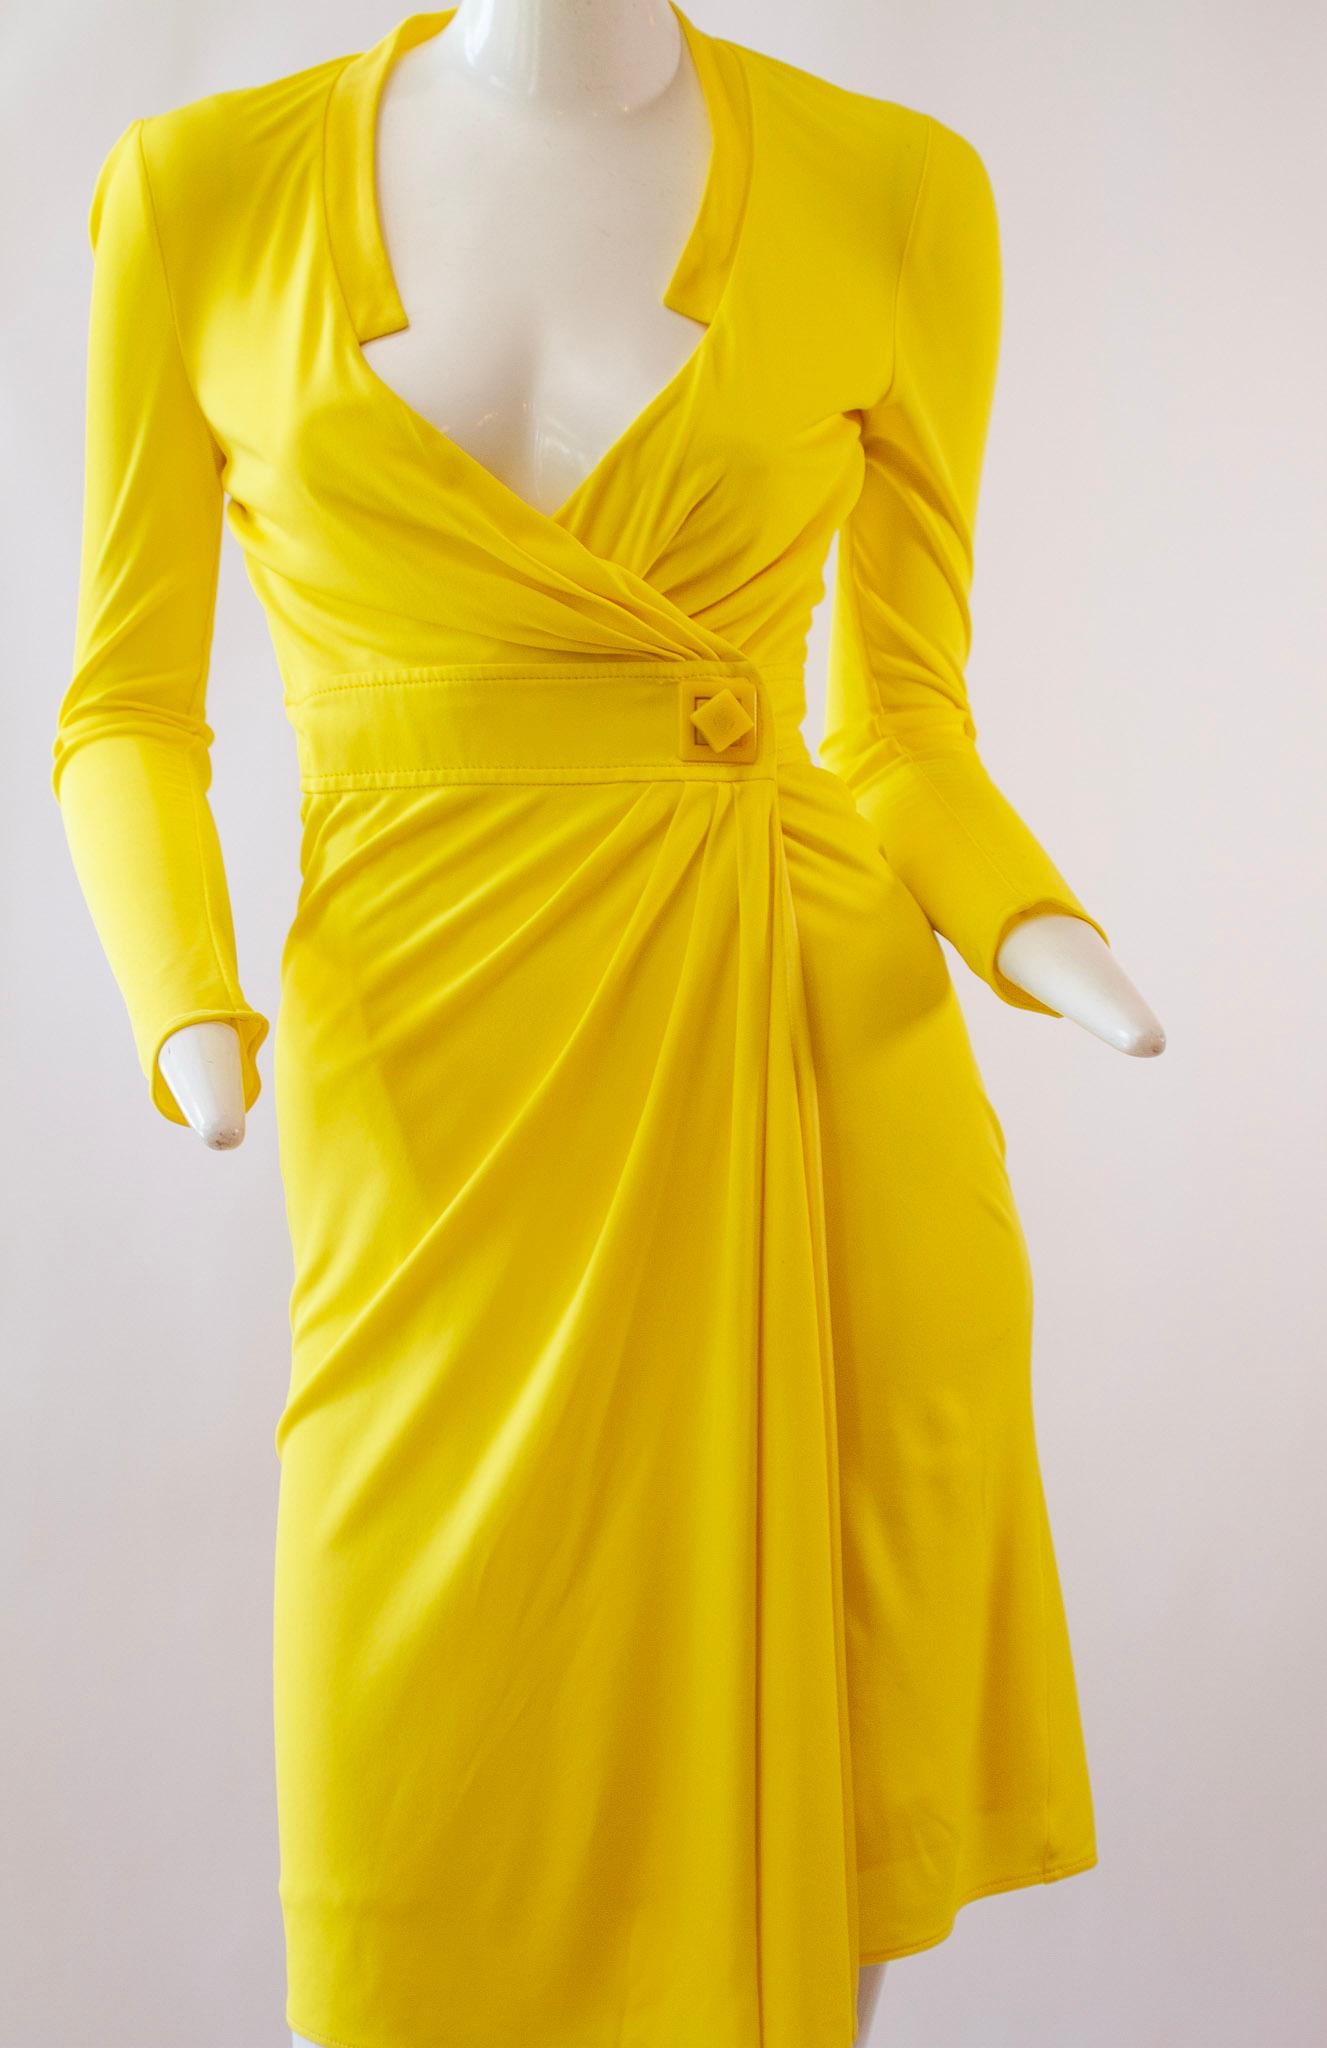 GIANNI VERSACE, Canary Yellow Mid-Length Wrap Dress with Rotating Square Medusa Fastener. Long Sleeves and Plunging Neckline
Early 2000s

size 38

Medusa head square button fastener detail.